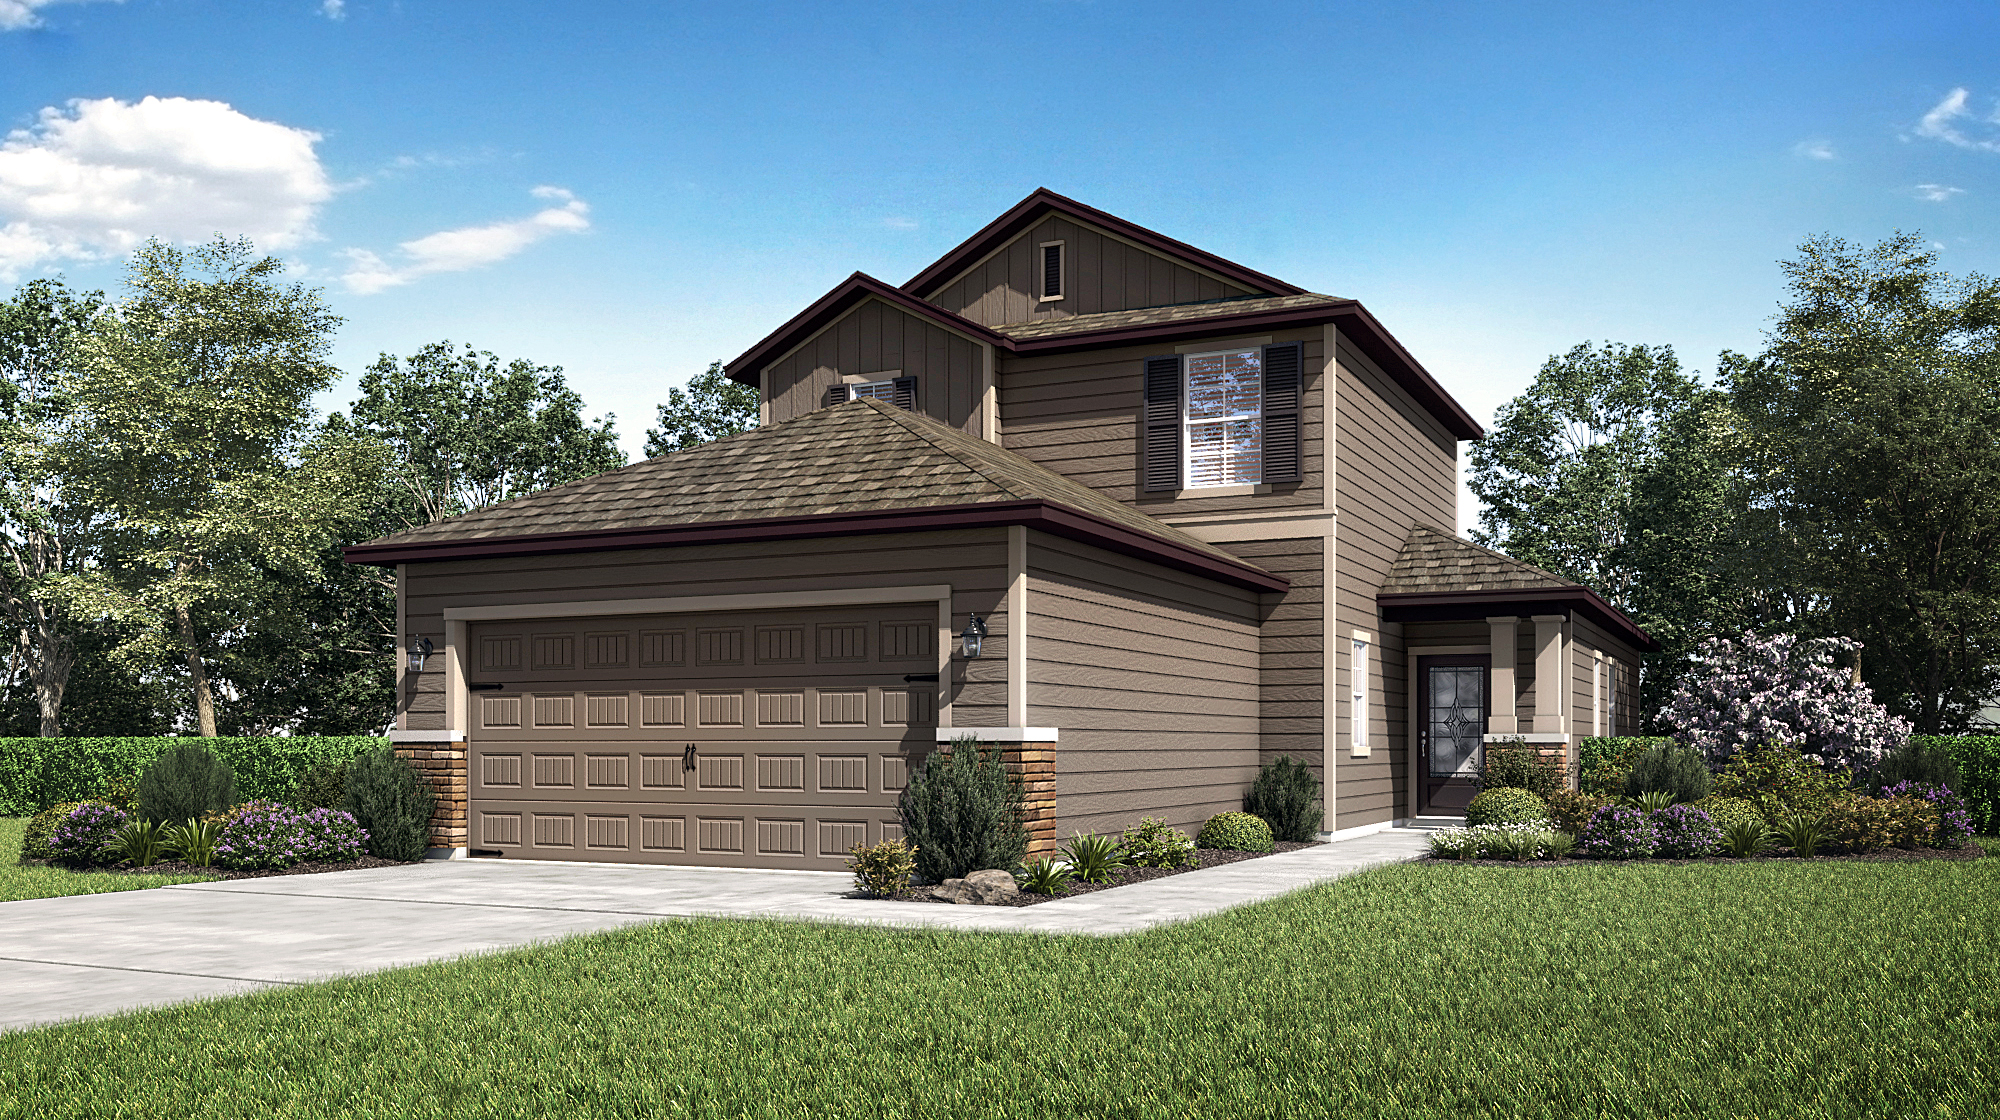 The Tomoka by LGI Homes will be available at the Creekside at Twin Creeks Grand Opening on Dec. 7, 2019.